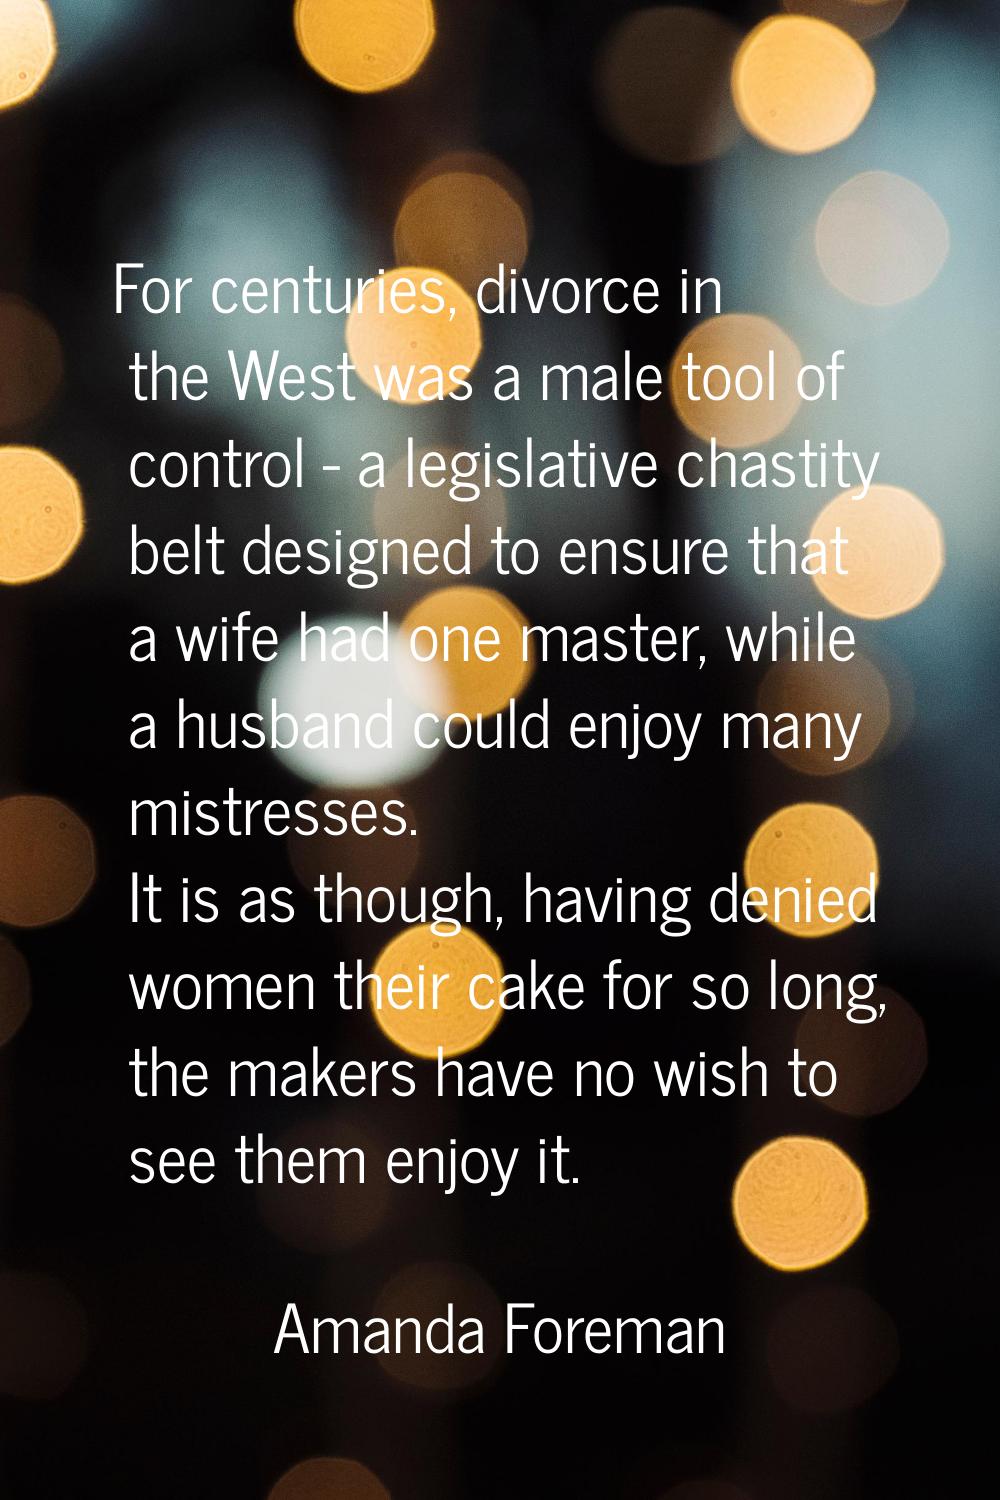 For centuries, divorce in the West was a male tool of control - a legislative chastity belt designe